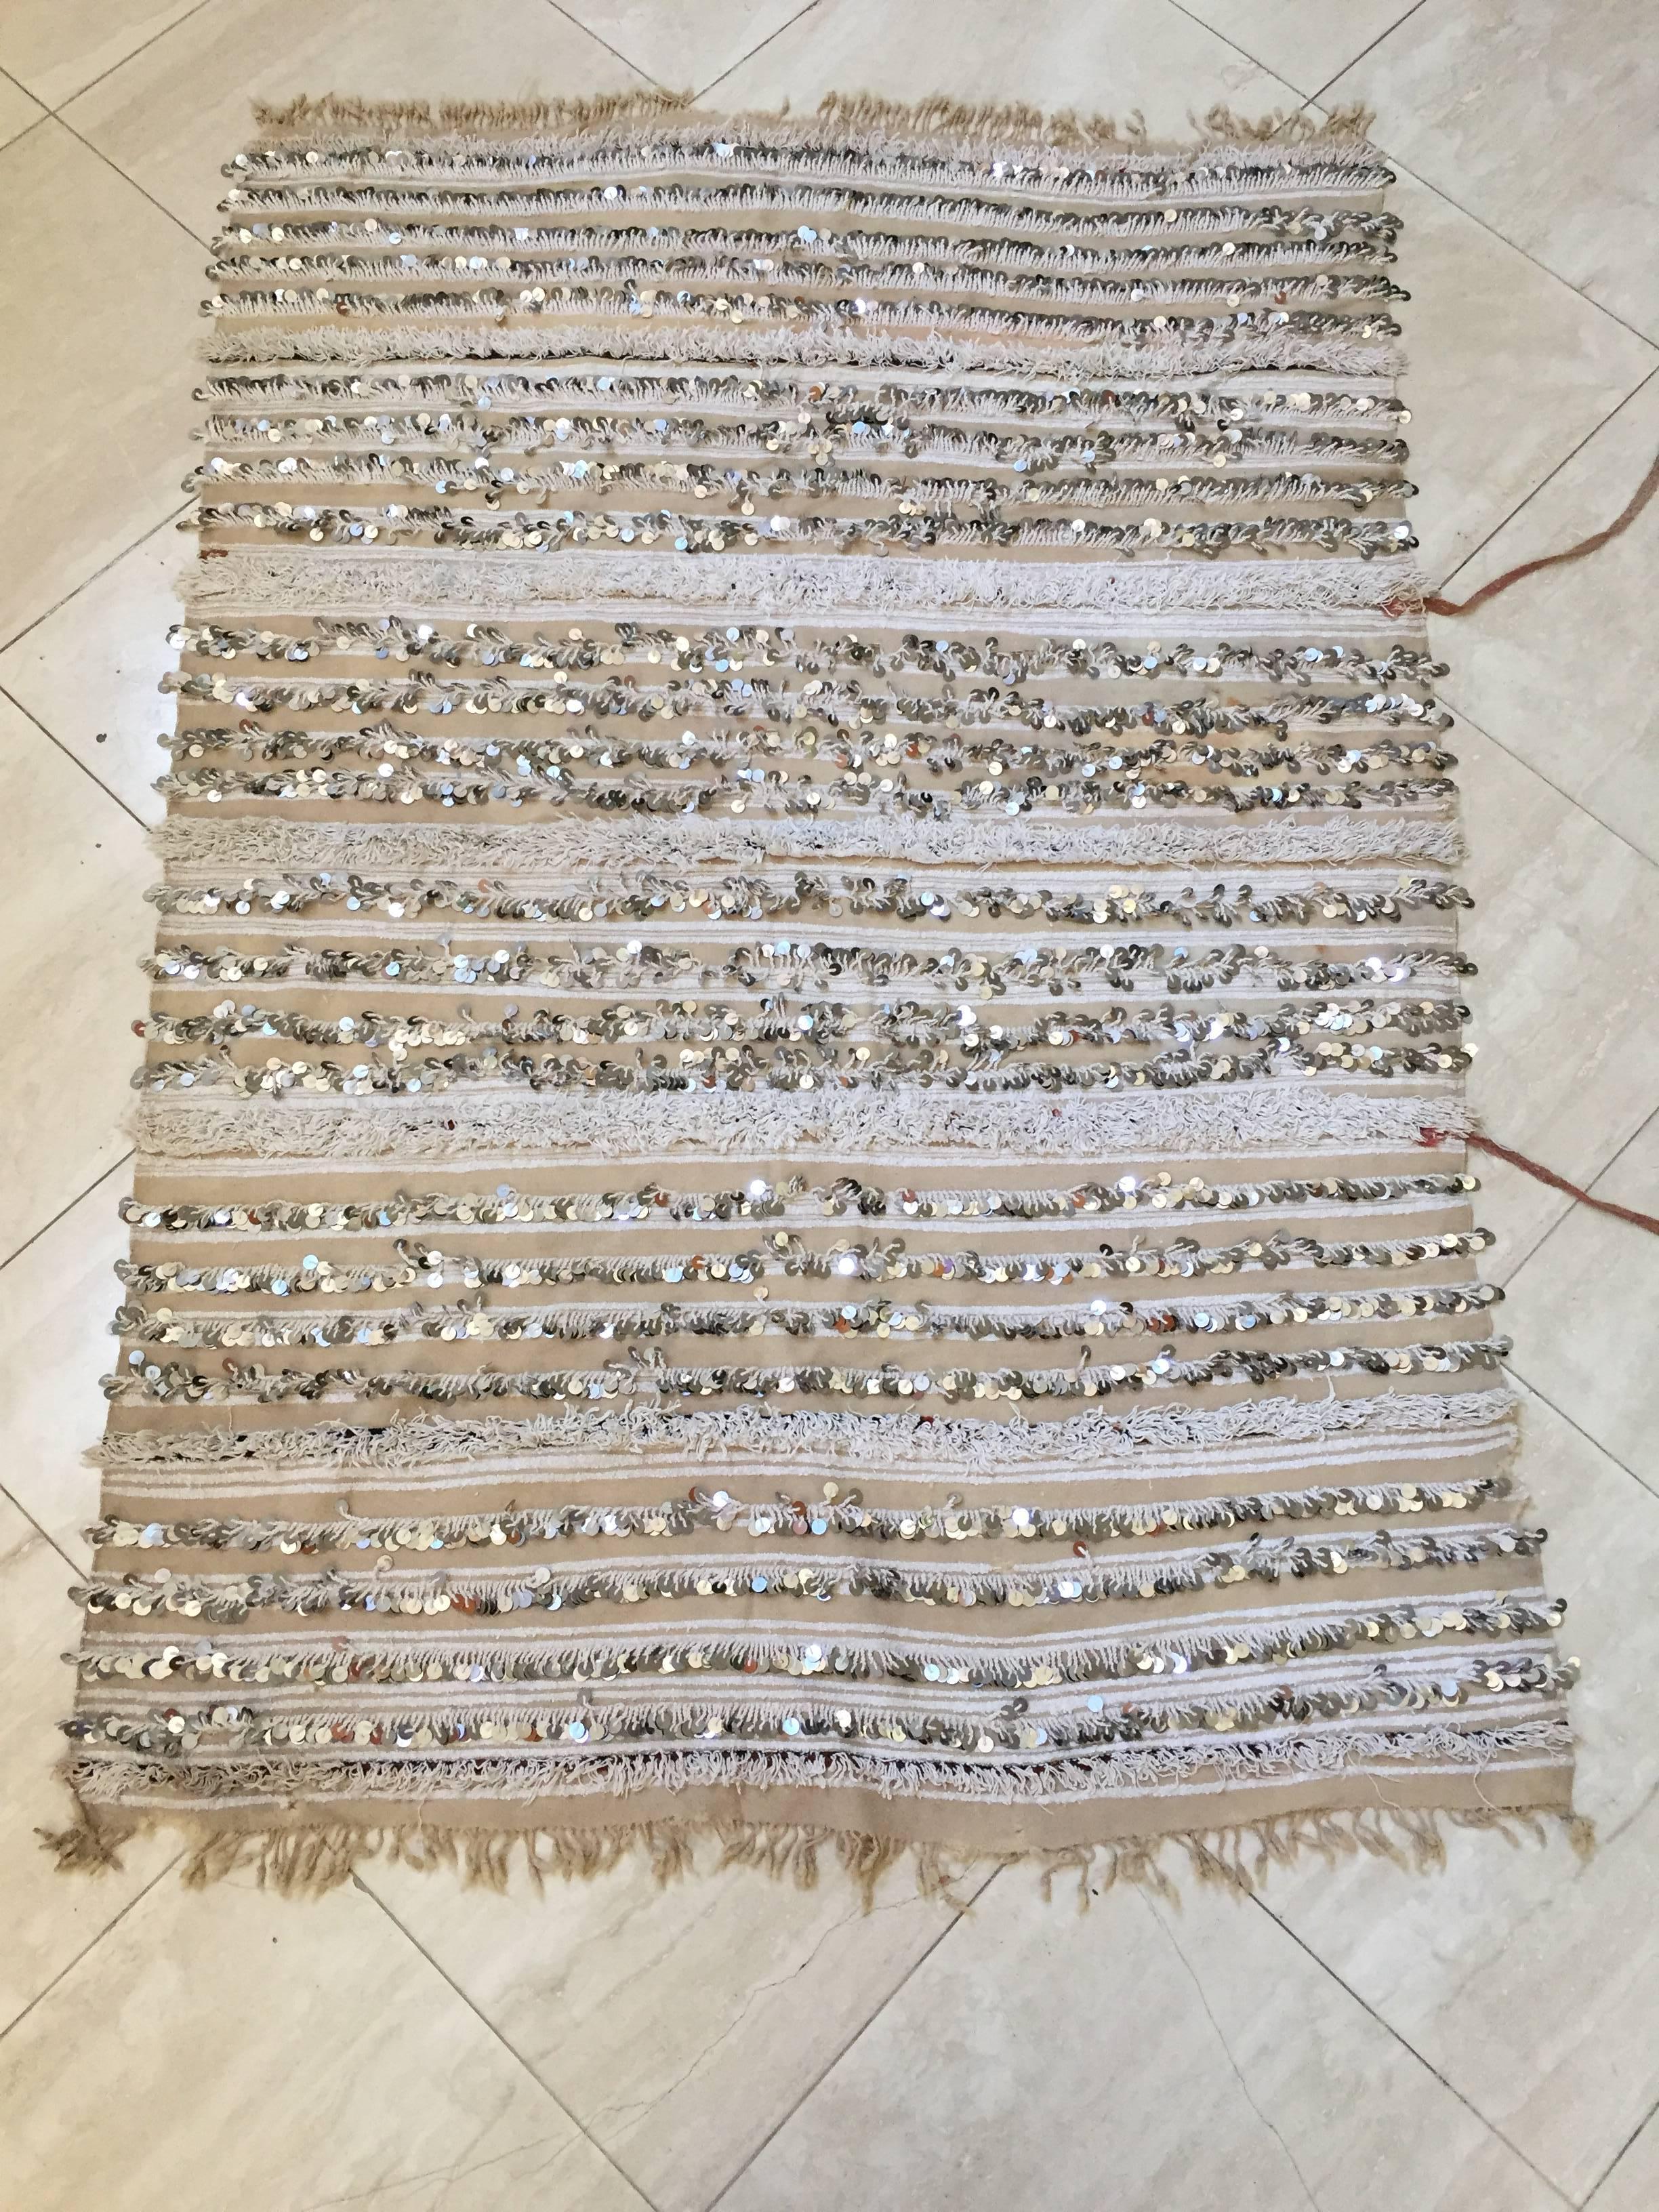 large vintage original tribal Moroccan wedding Berber women shawl, blanket, throw.
The Zaiane tribal shawls incorporate quantities of sequins in their design to achieve an impressive decorative effect on the alternate stripes of wool and cotton